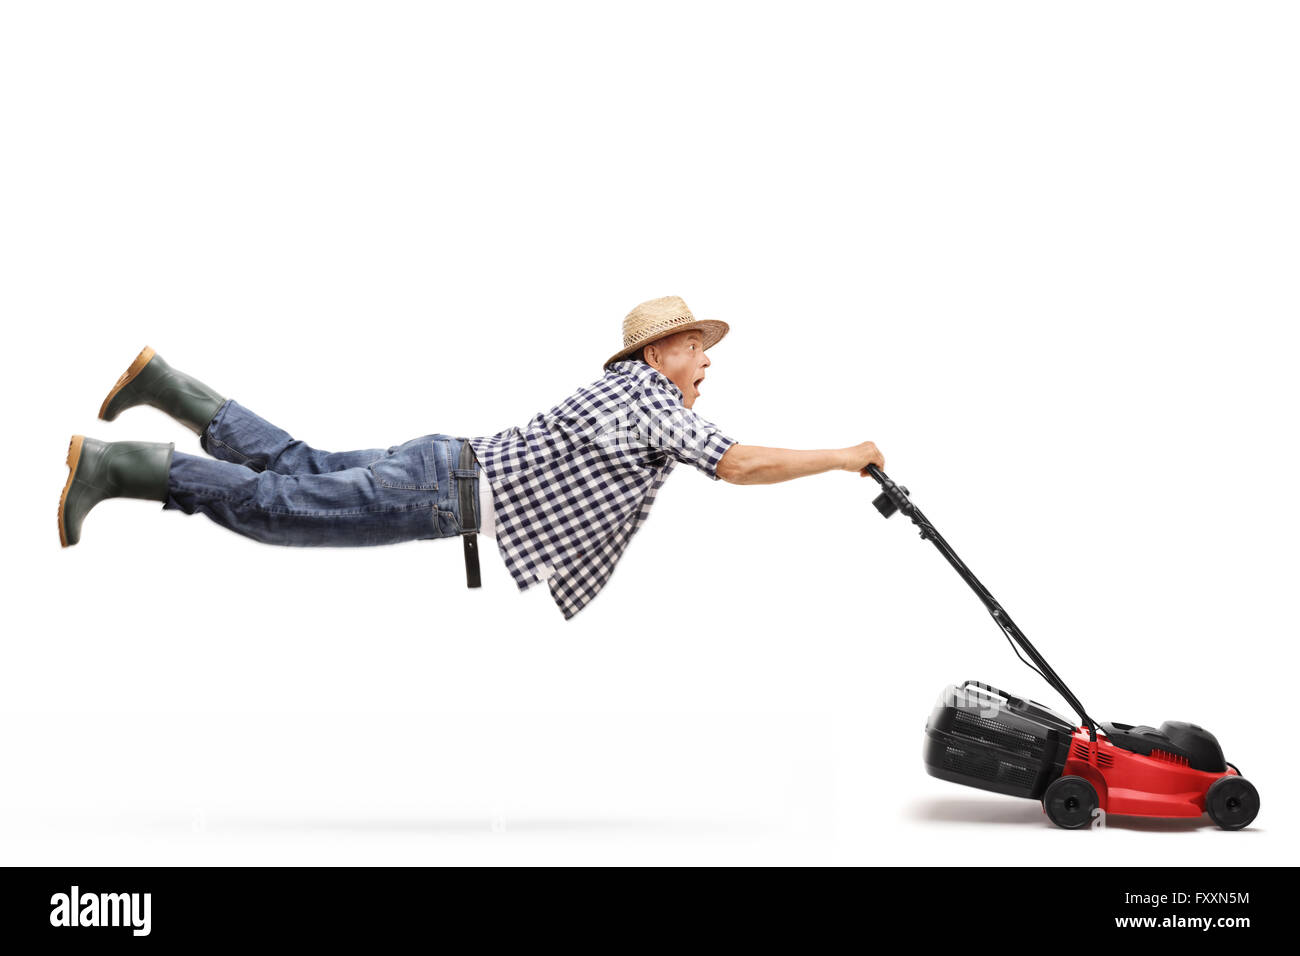 Mature gardener being pulled by a powerful lawn-mower isolated on white background Stock Photo